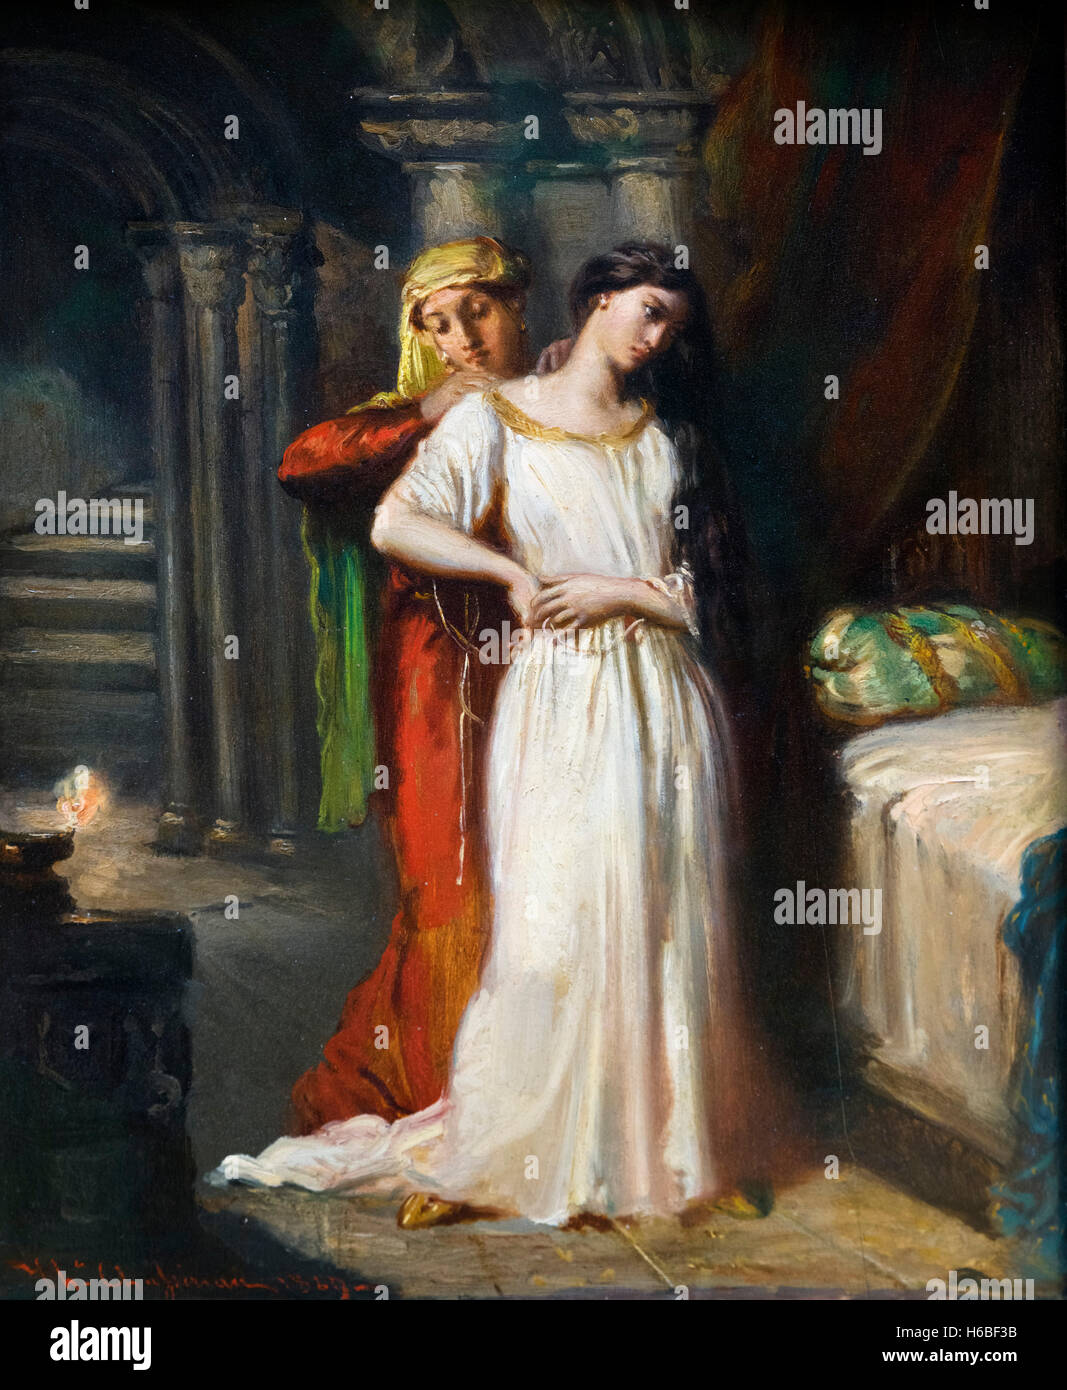 'Desdemona Retiring to her Bed' (Le coucher de Desdémone) by Théodore Chassériau, oil on panel, 1849 Stock Photo